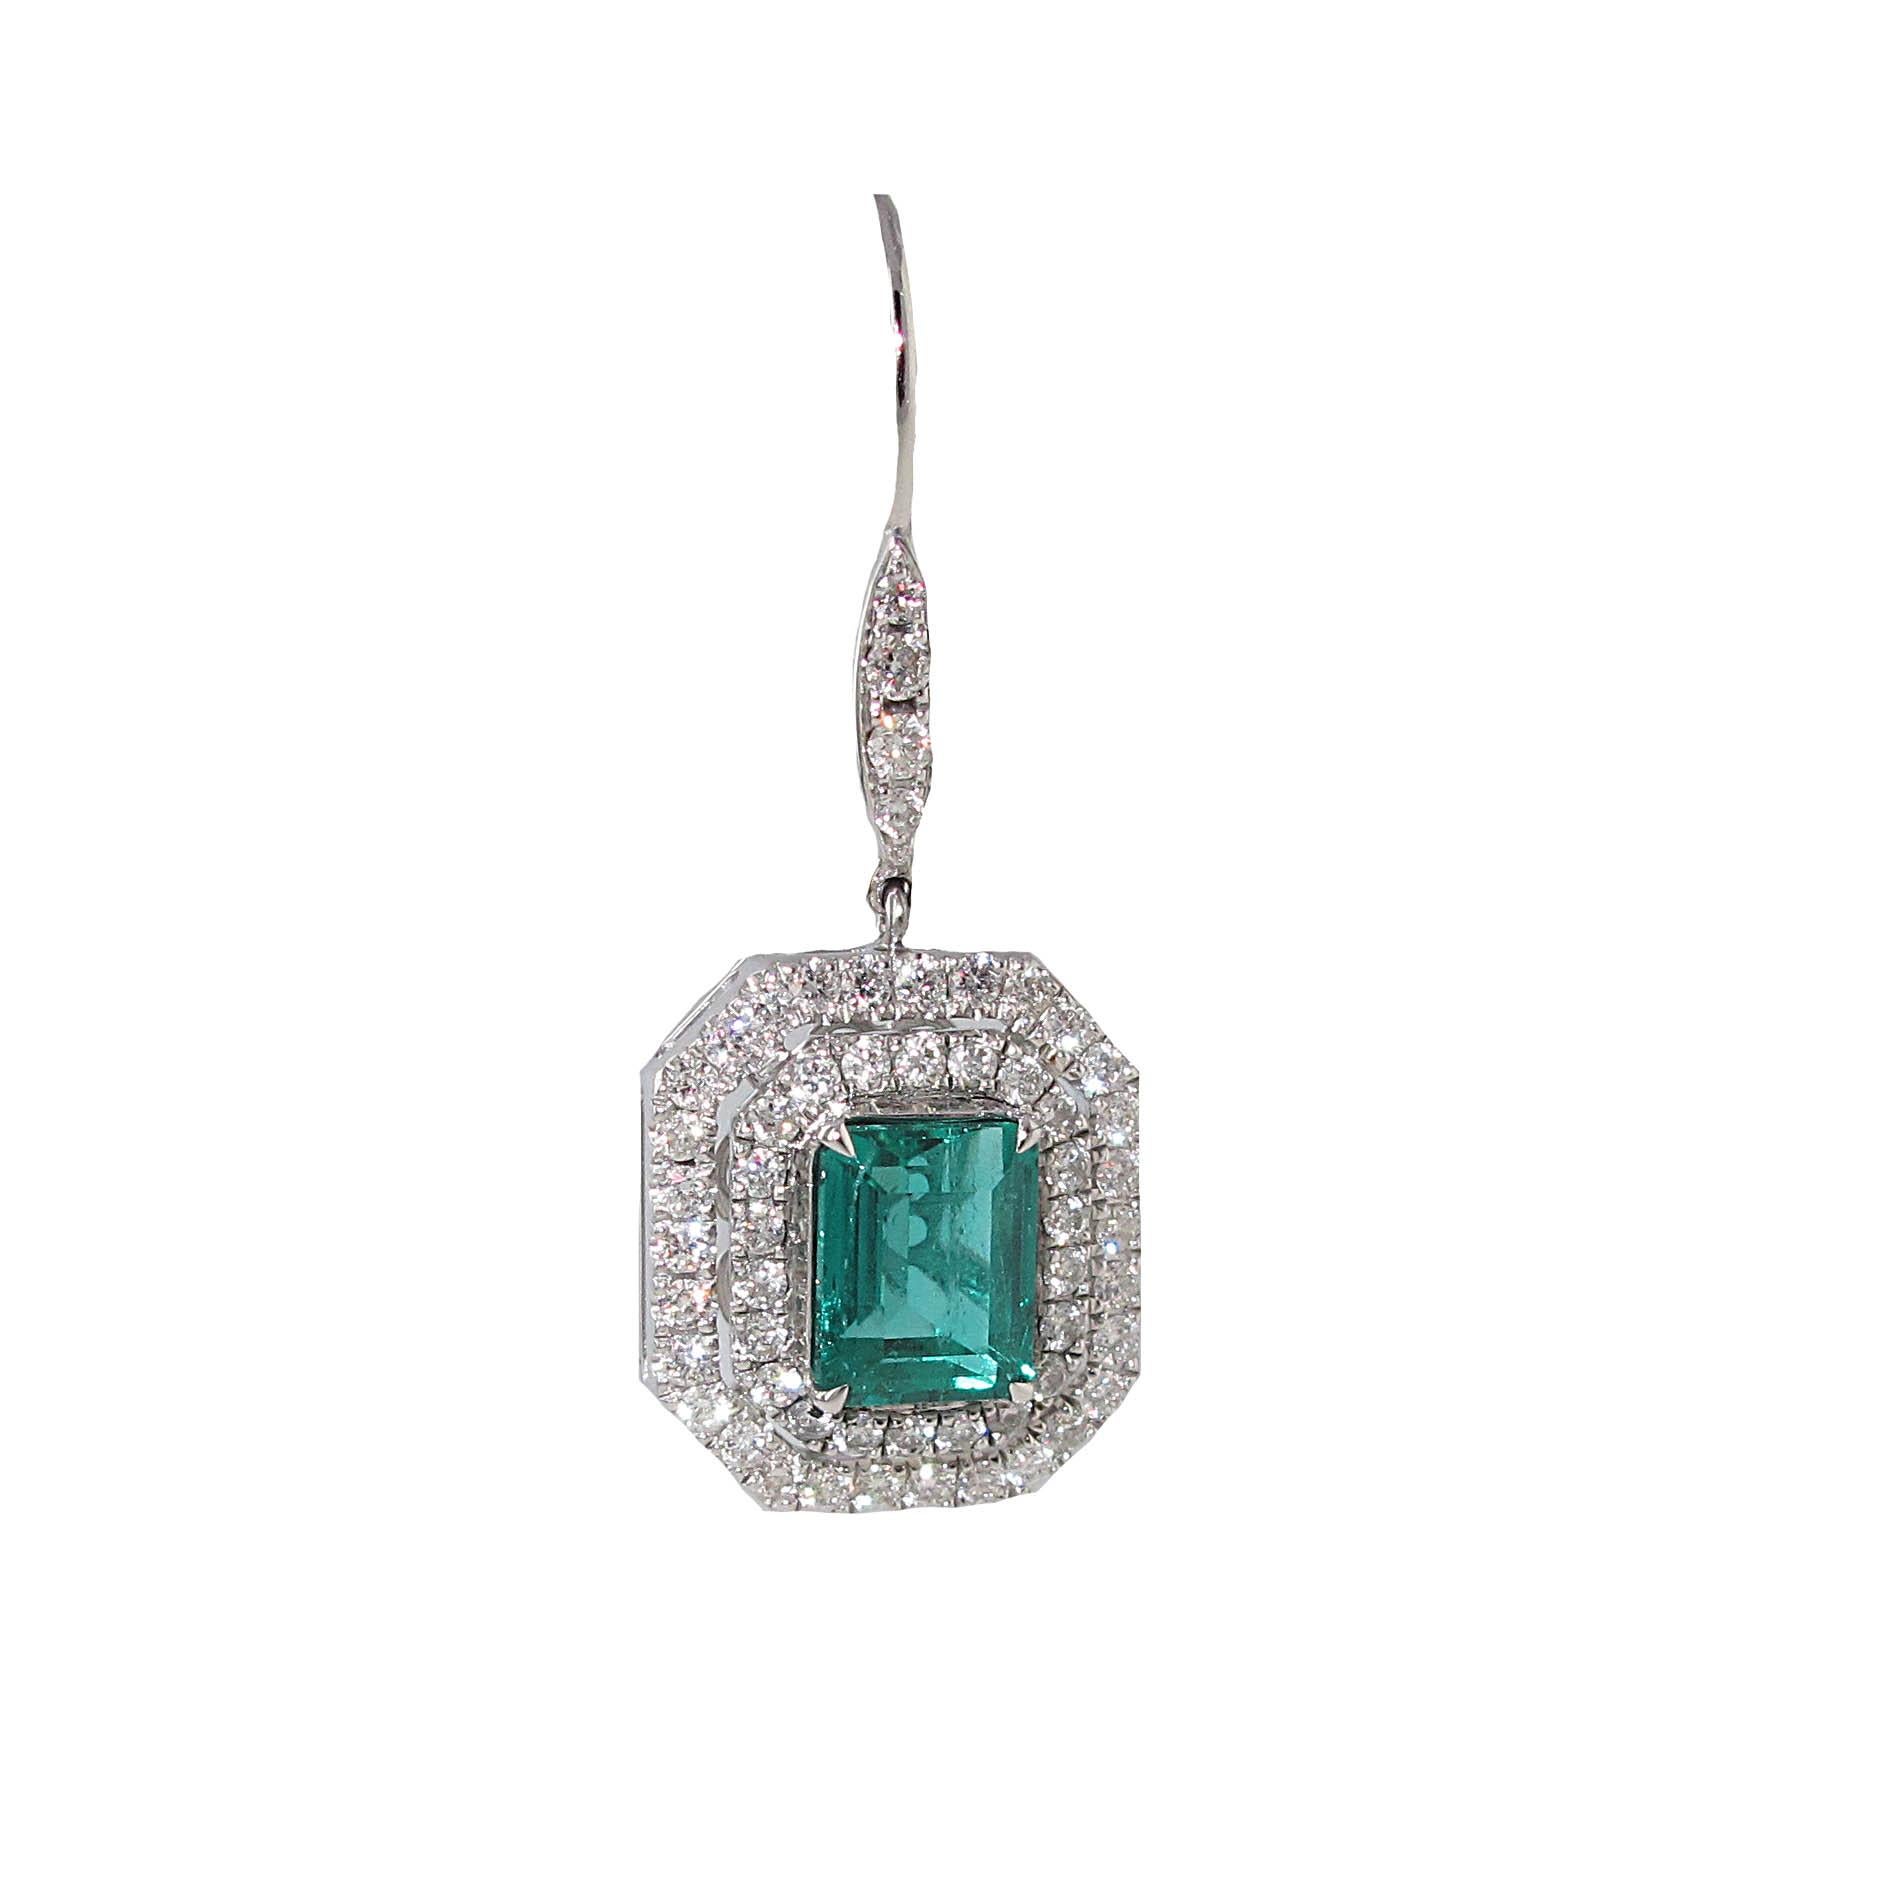 GRS certified, 2.48 carat total weight natural No Oil Columbian Emerald and Diamond drop earrings. Both of the emeralds are GemResearch SwissLab, GRS, certified.
One of the center stones are a 1.32 carat Natural No Oil Columbian Emerald. The